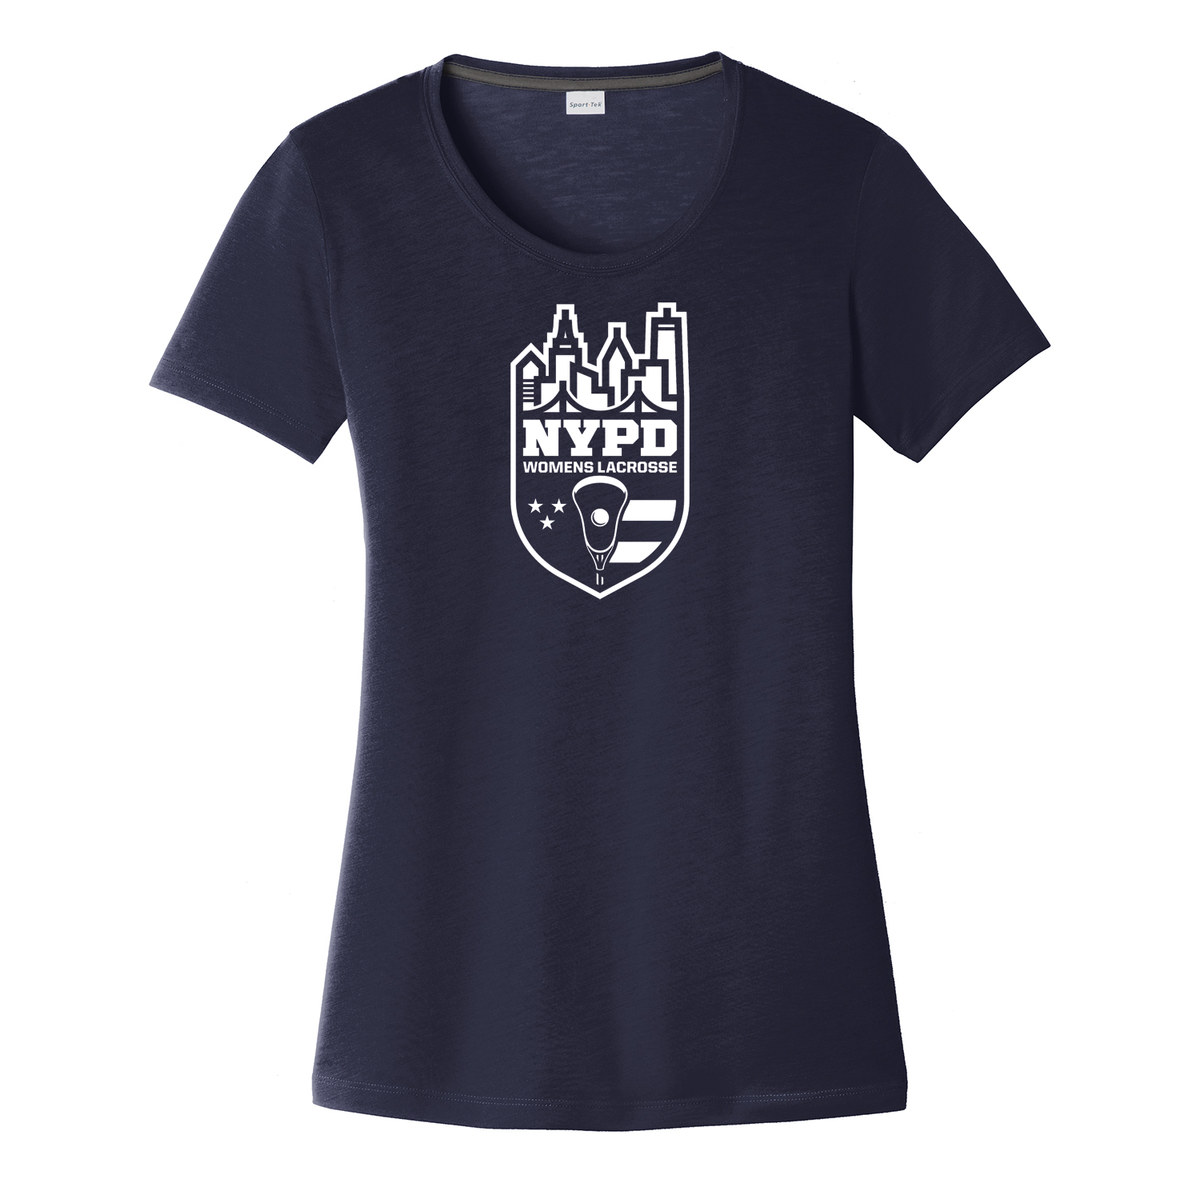 NYPD Womens Lacrosse Women's CottonTouch Performance T-Shirt